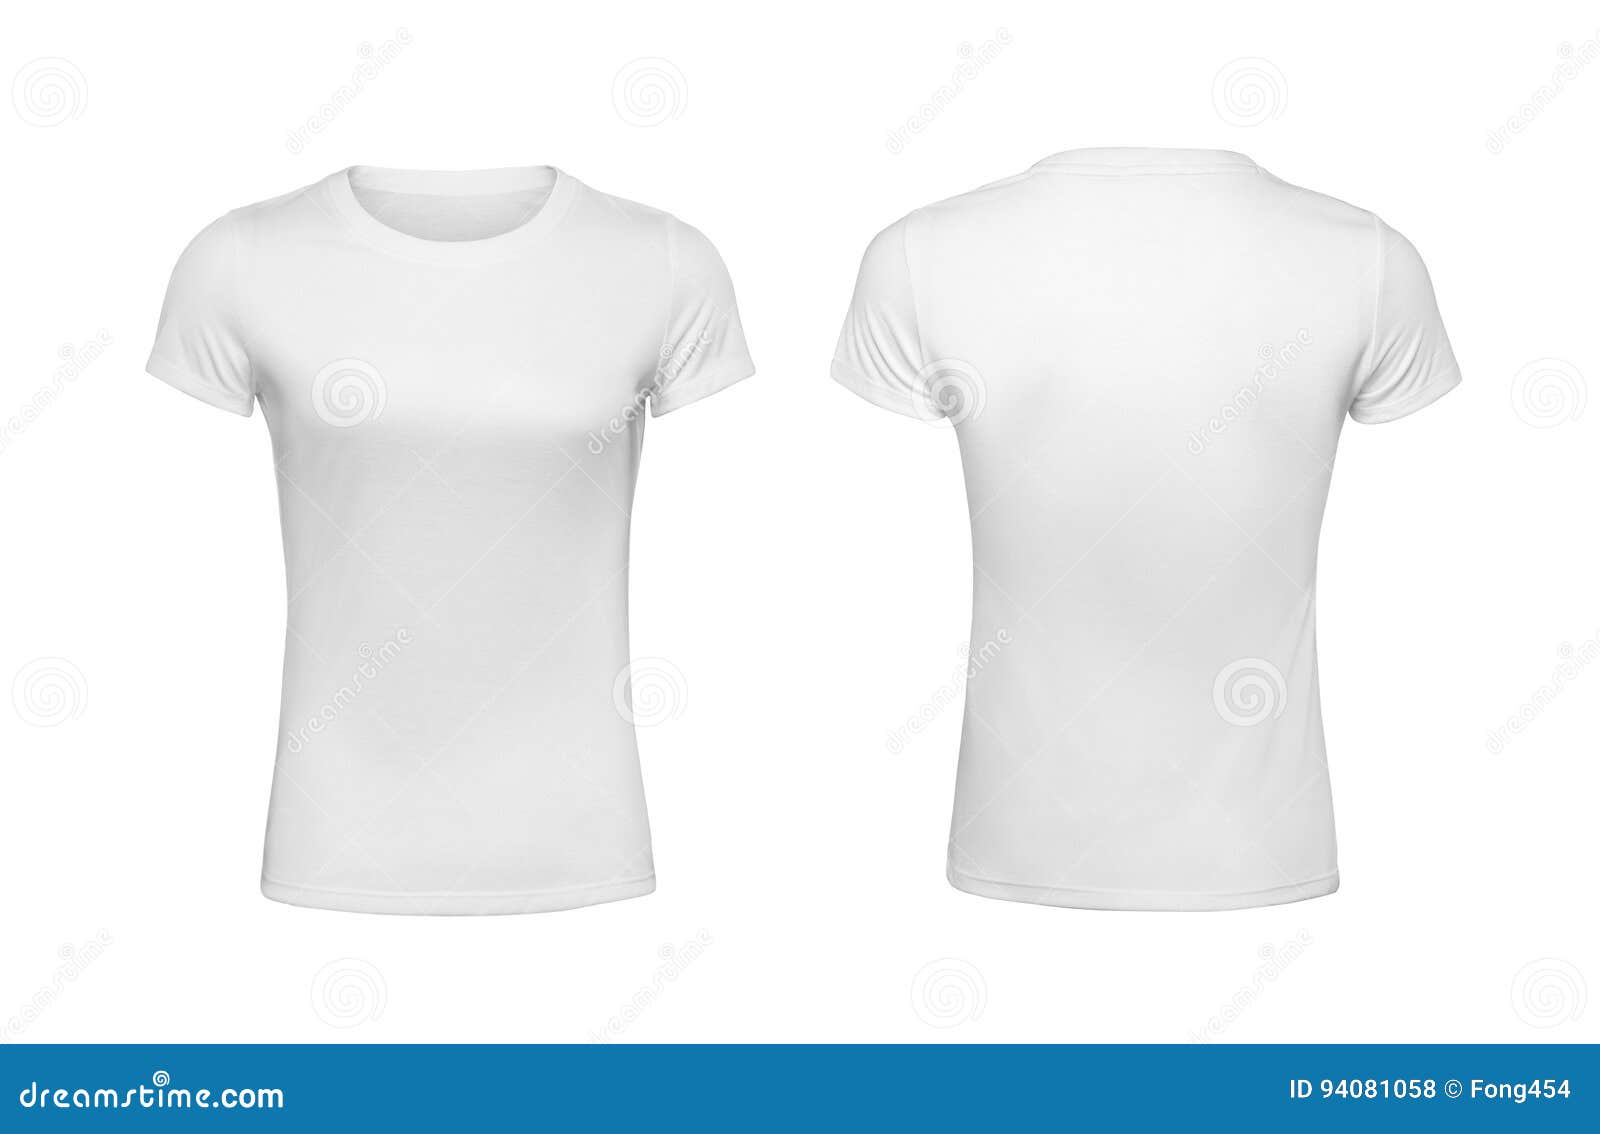 Download Women`s Shirt Design Templates Back And Front View ...